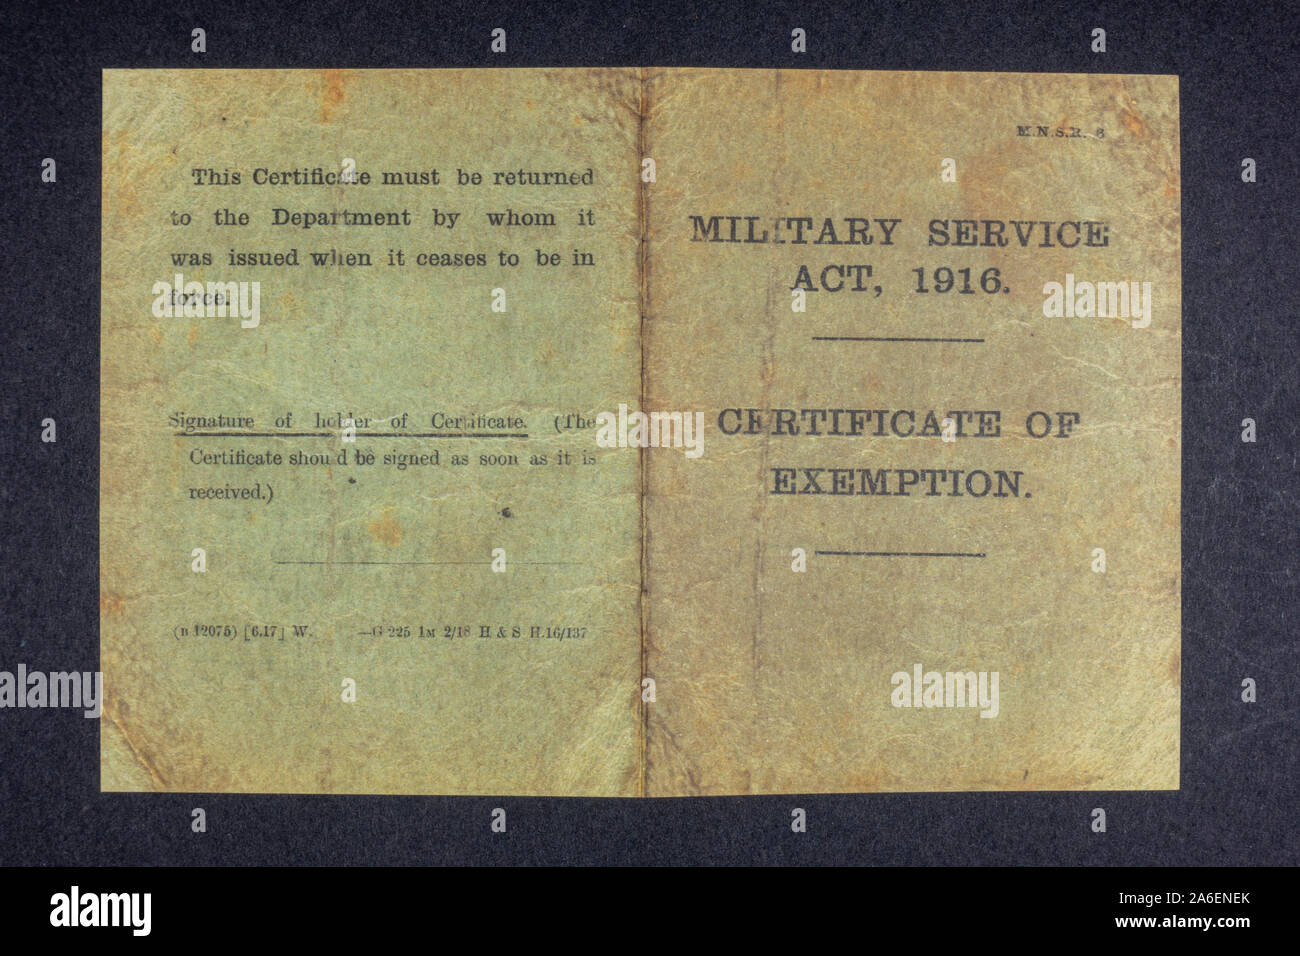 Certificate of Exemption, Military Service Act, 1916 (replica) front and back page, a piece of memorabilia from the World War One era. Stock Photo